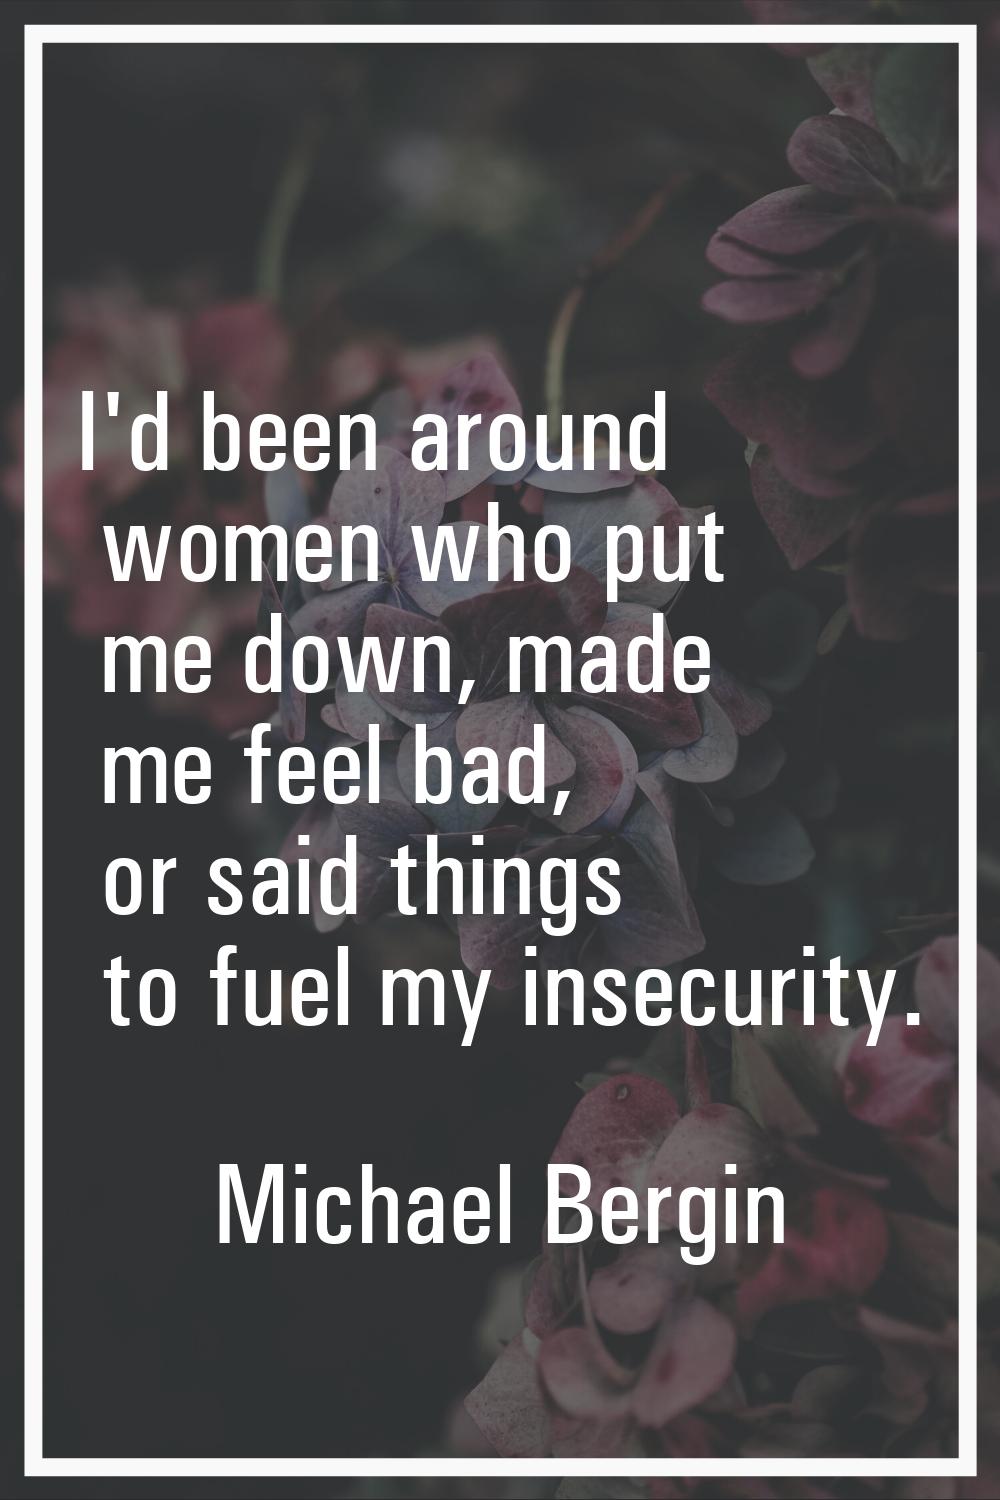 I'd been around women who put me down, made me feel bad, or said things to fuel my insecurity.